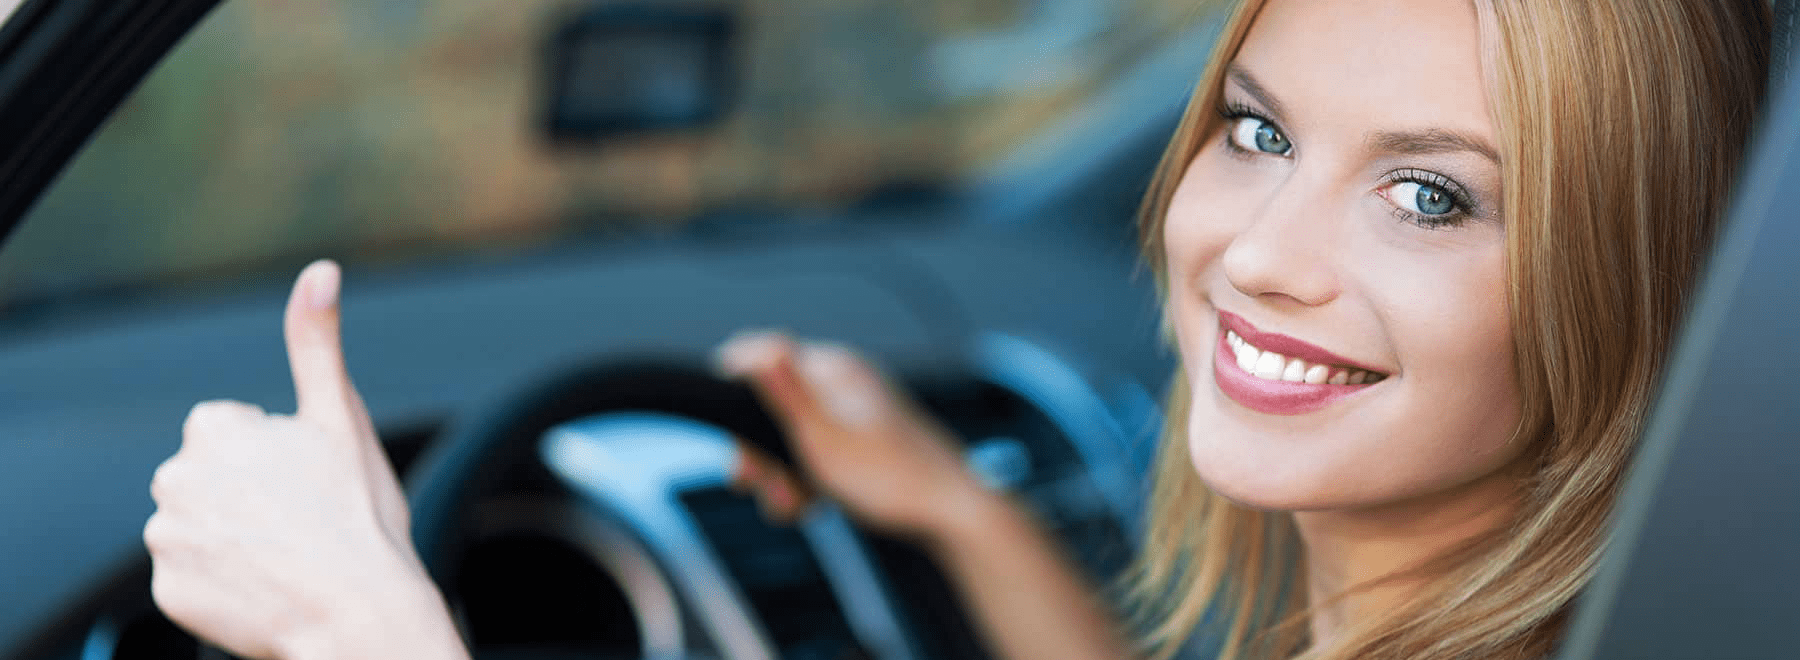 smiling-woman-gives-thumbs-up-in-new-car